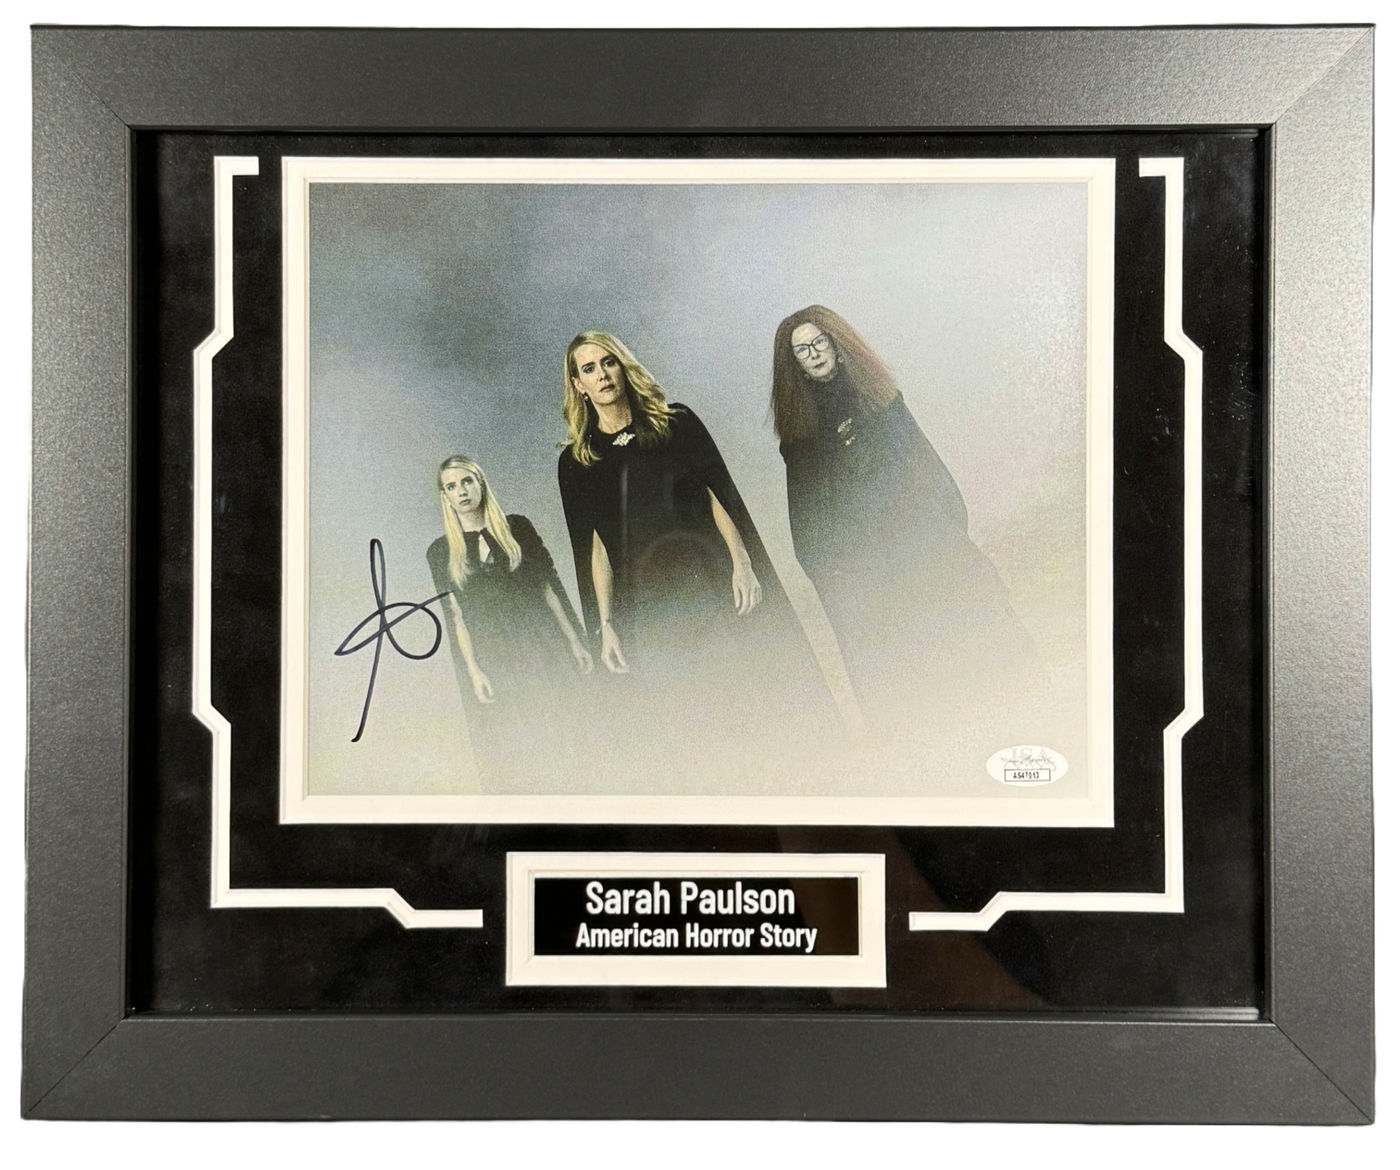 Sarah Paulson Signed & Custom Framed 8x10 Photo Authentic American Horror Story Autographed JSA